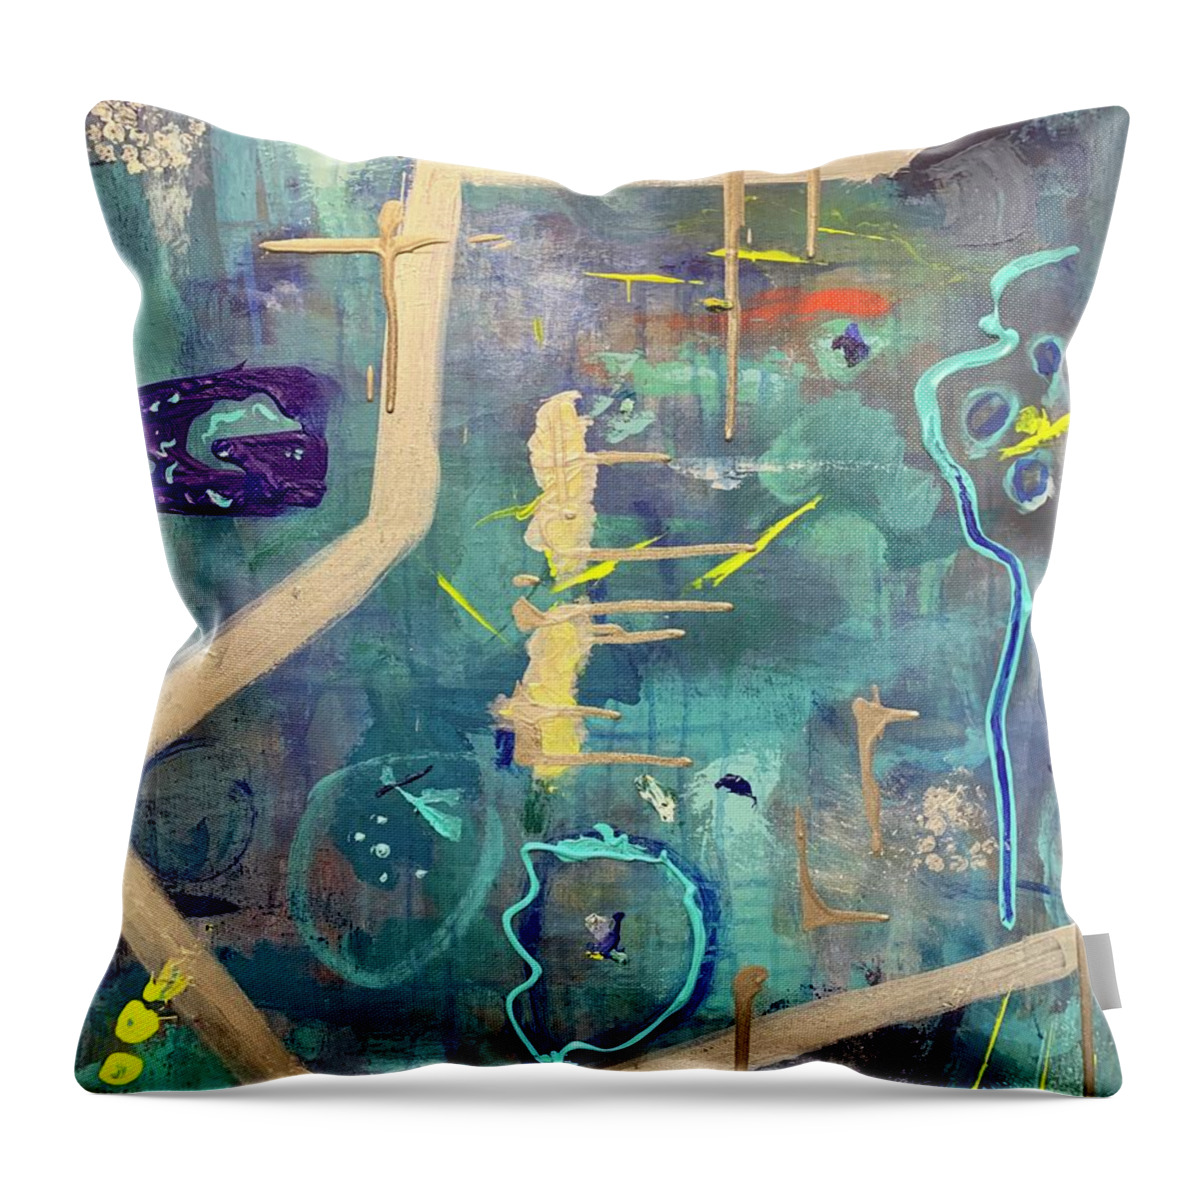 Abstract Throw Pillow featuring the painting Tribal Mood by Laura Jaffe